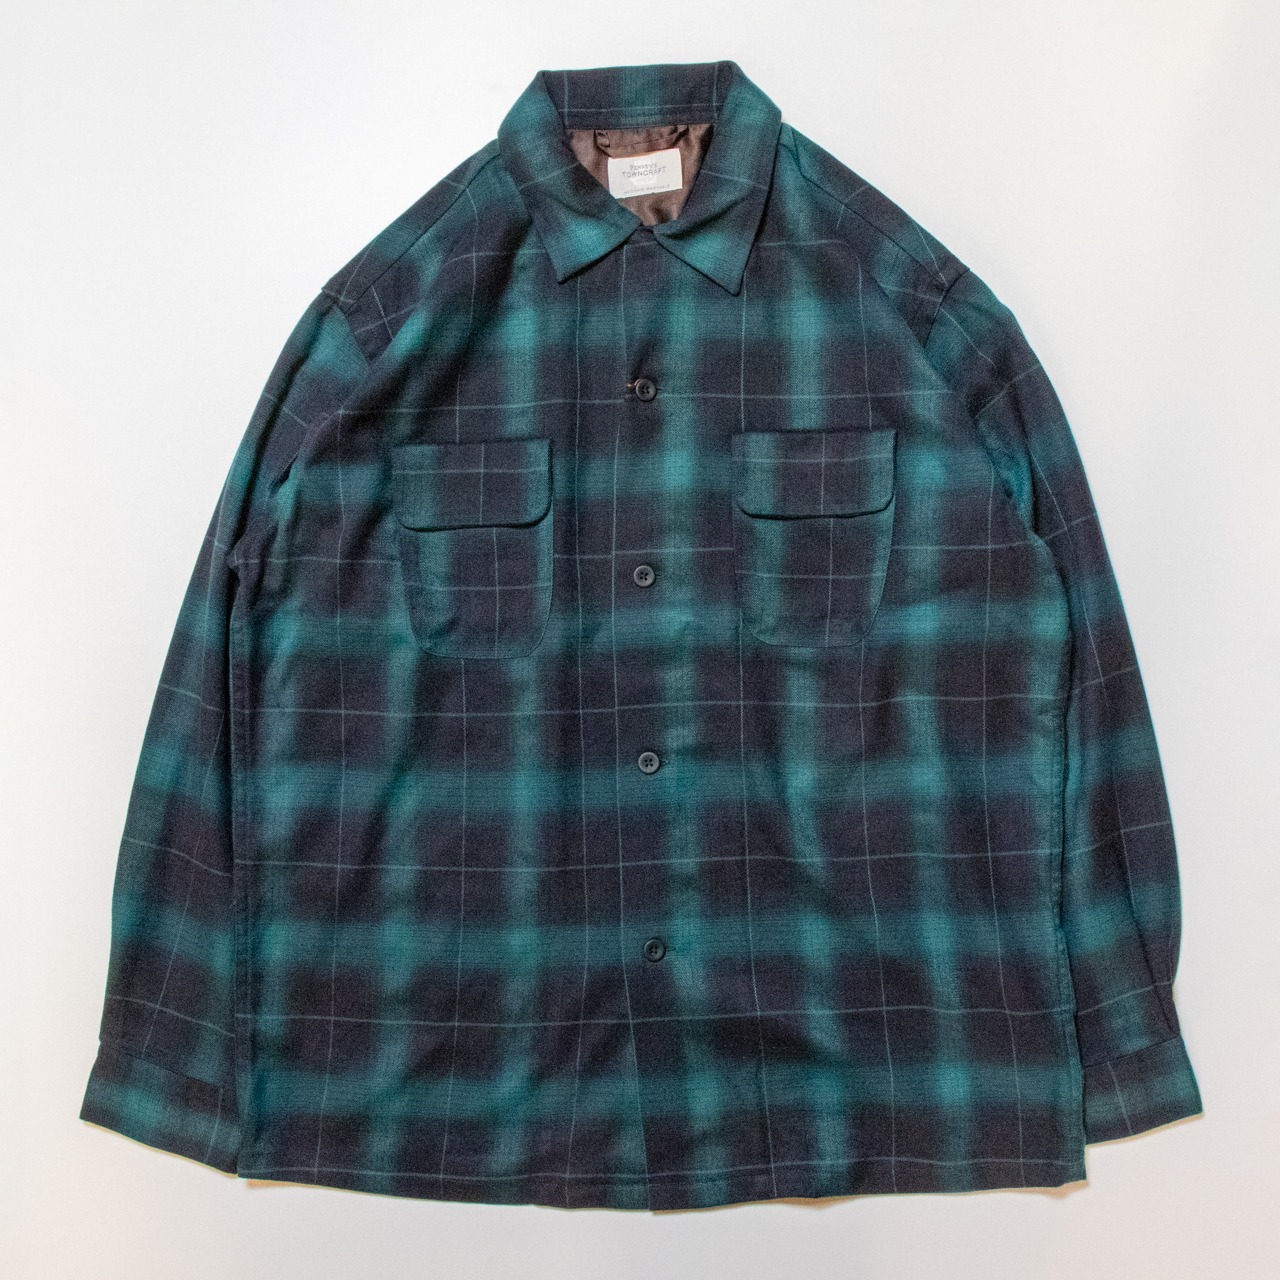 TOWN CRAFT タウンクラフト / OMBRE W-FLAP 50S SHIRTS / オンブレ 